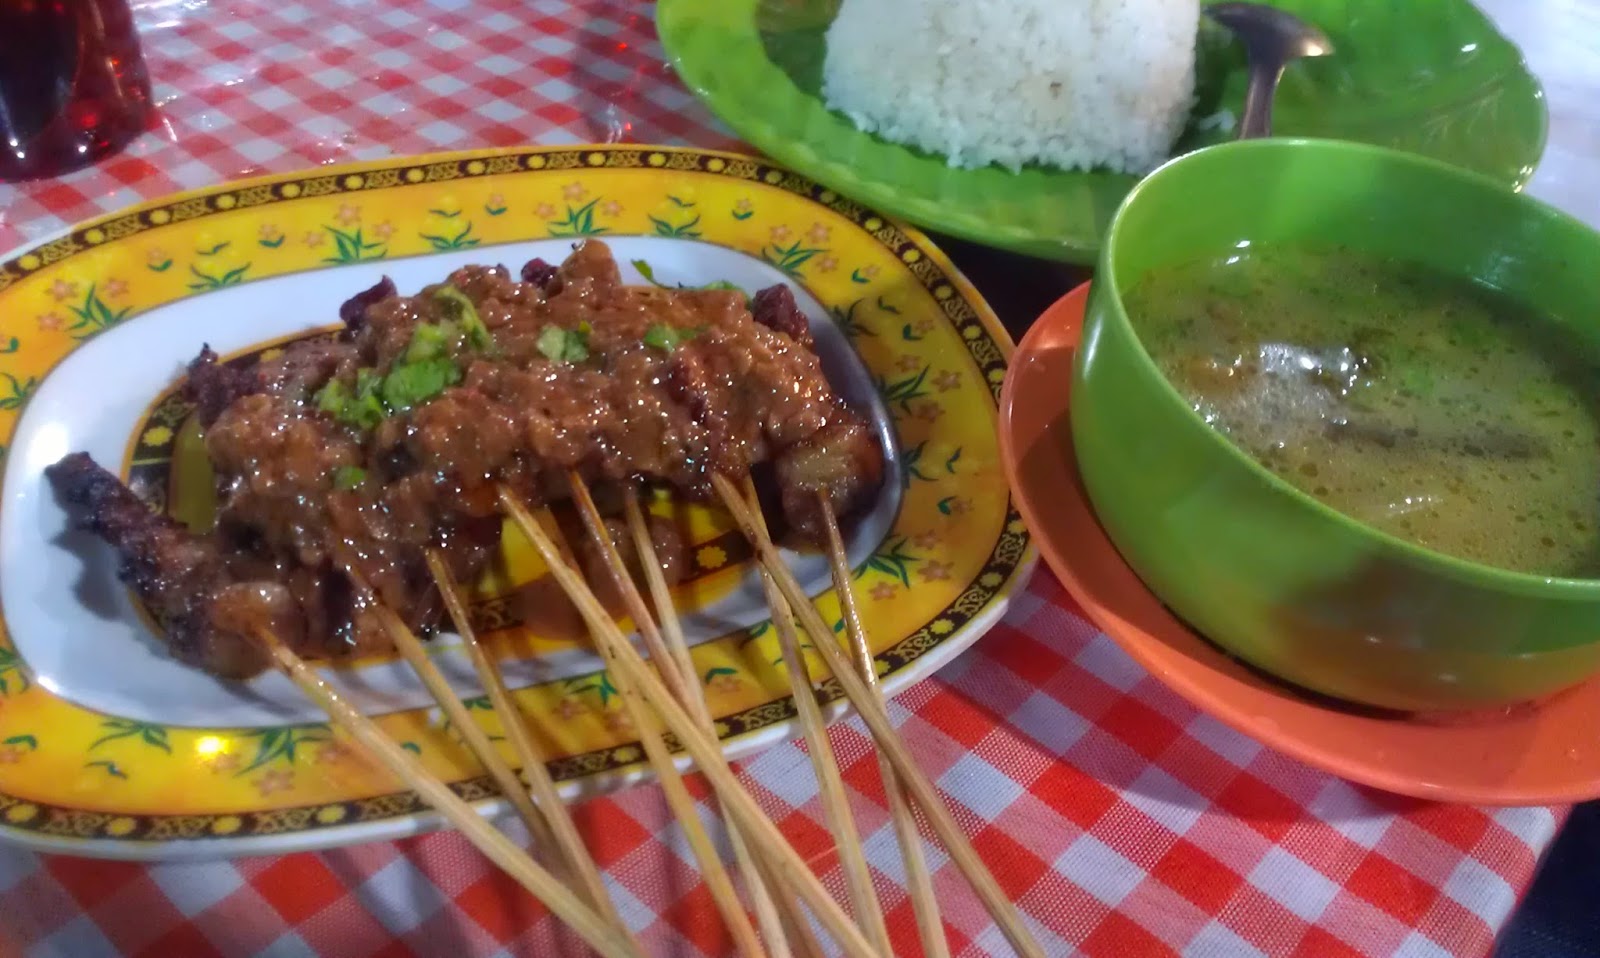 sate matang aceh | Journey Indonesia